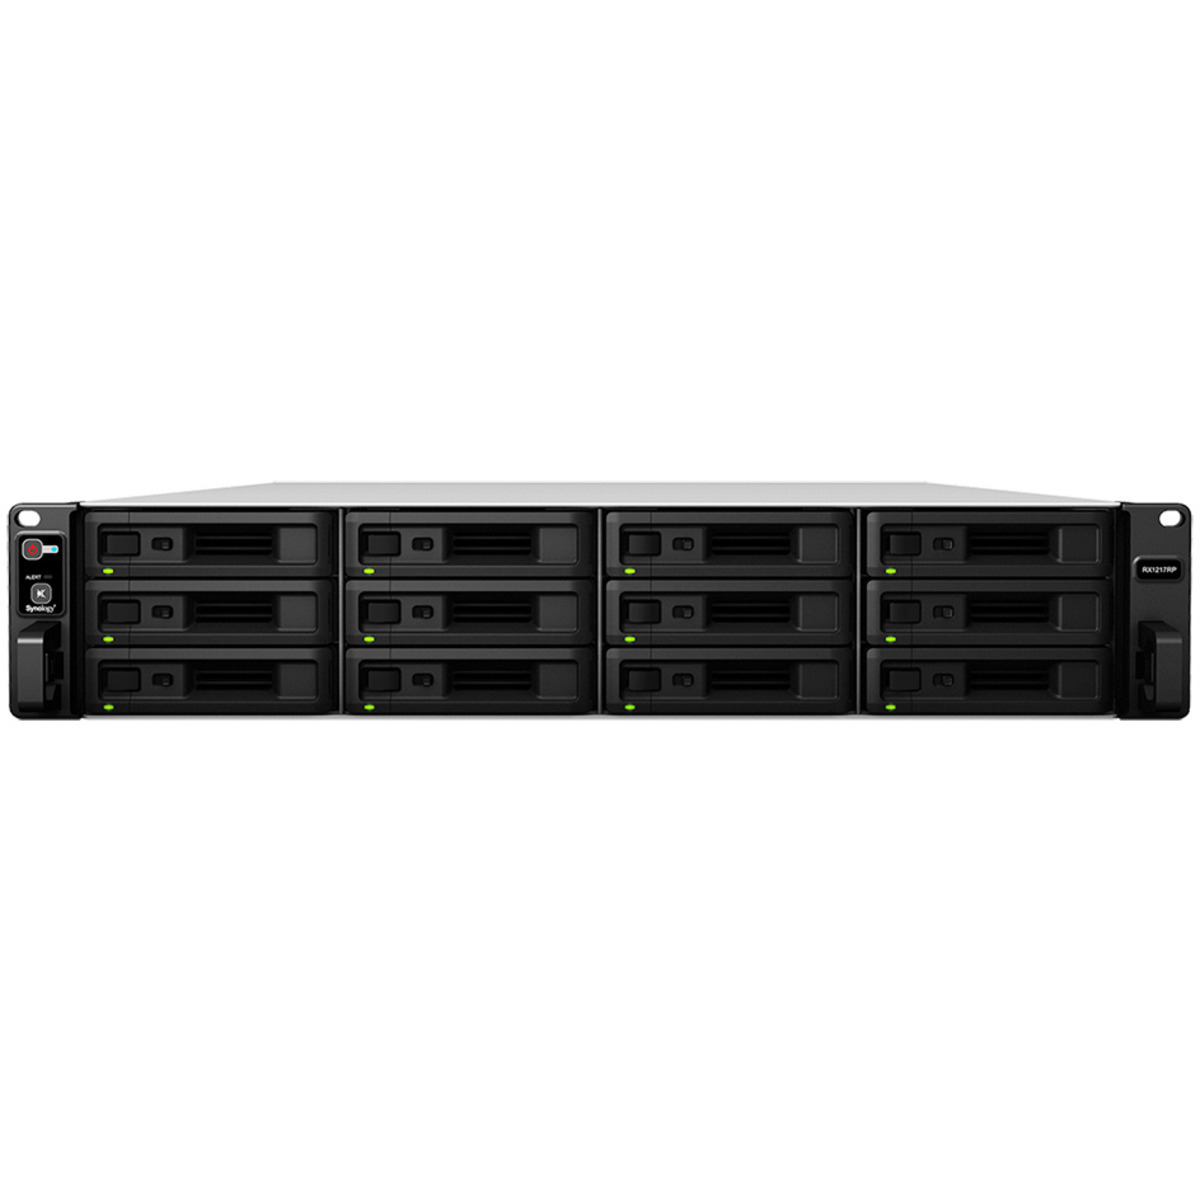 buy $3714 Synology RX1217 96tb RackMount Expansion Enclosure 12x8000gb Seagate BarraCuda ST8000DM004 3.5 5400rpm SATA 6Gb/s HDD CONSUMER Class Drives Installed - Burn-In Tested - nas headquarters buy network attached storage server device das new raid-5 free shipping usa christmas new year holiday sale RX1217